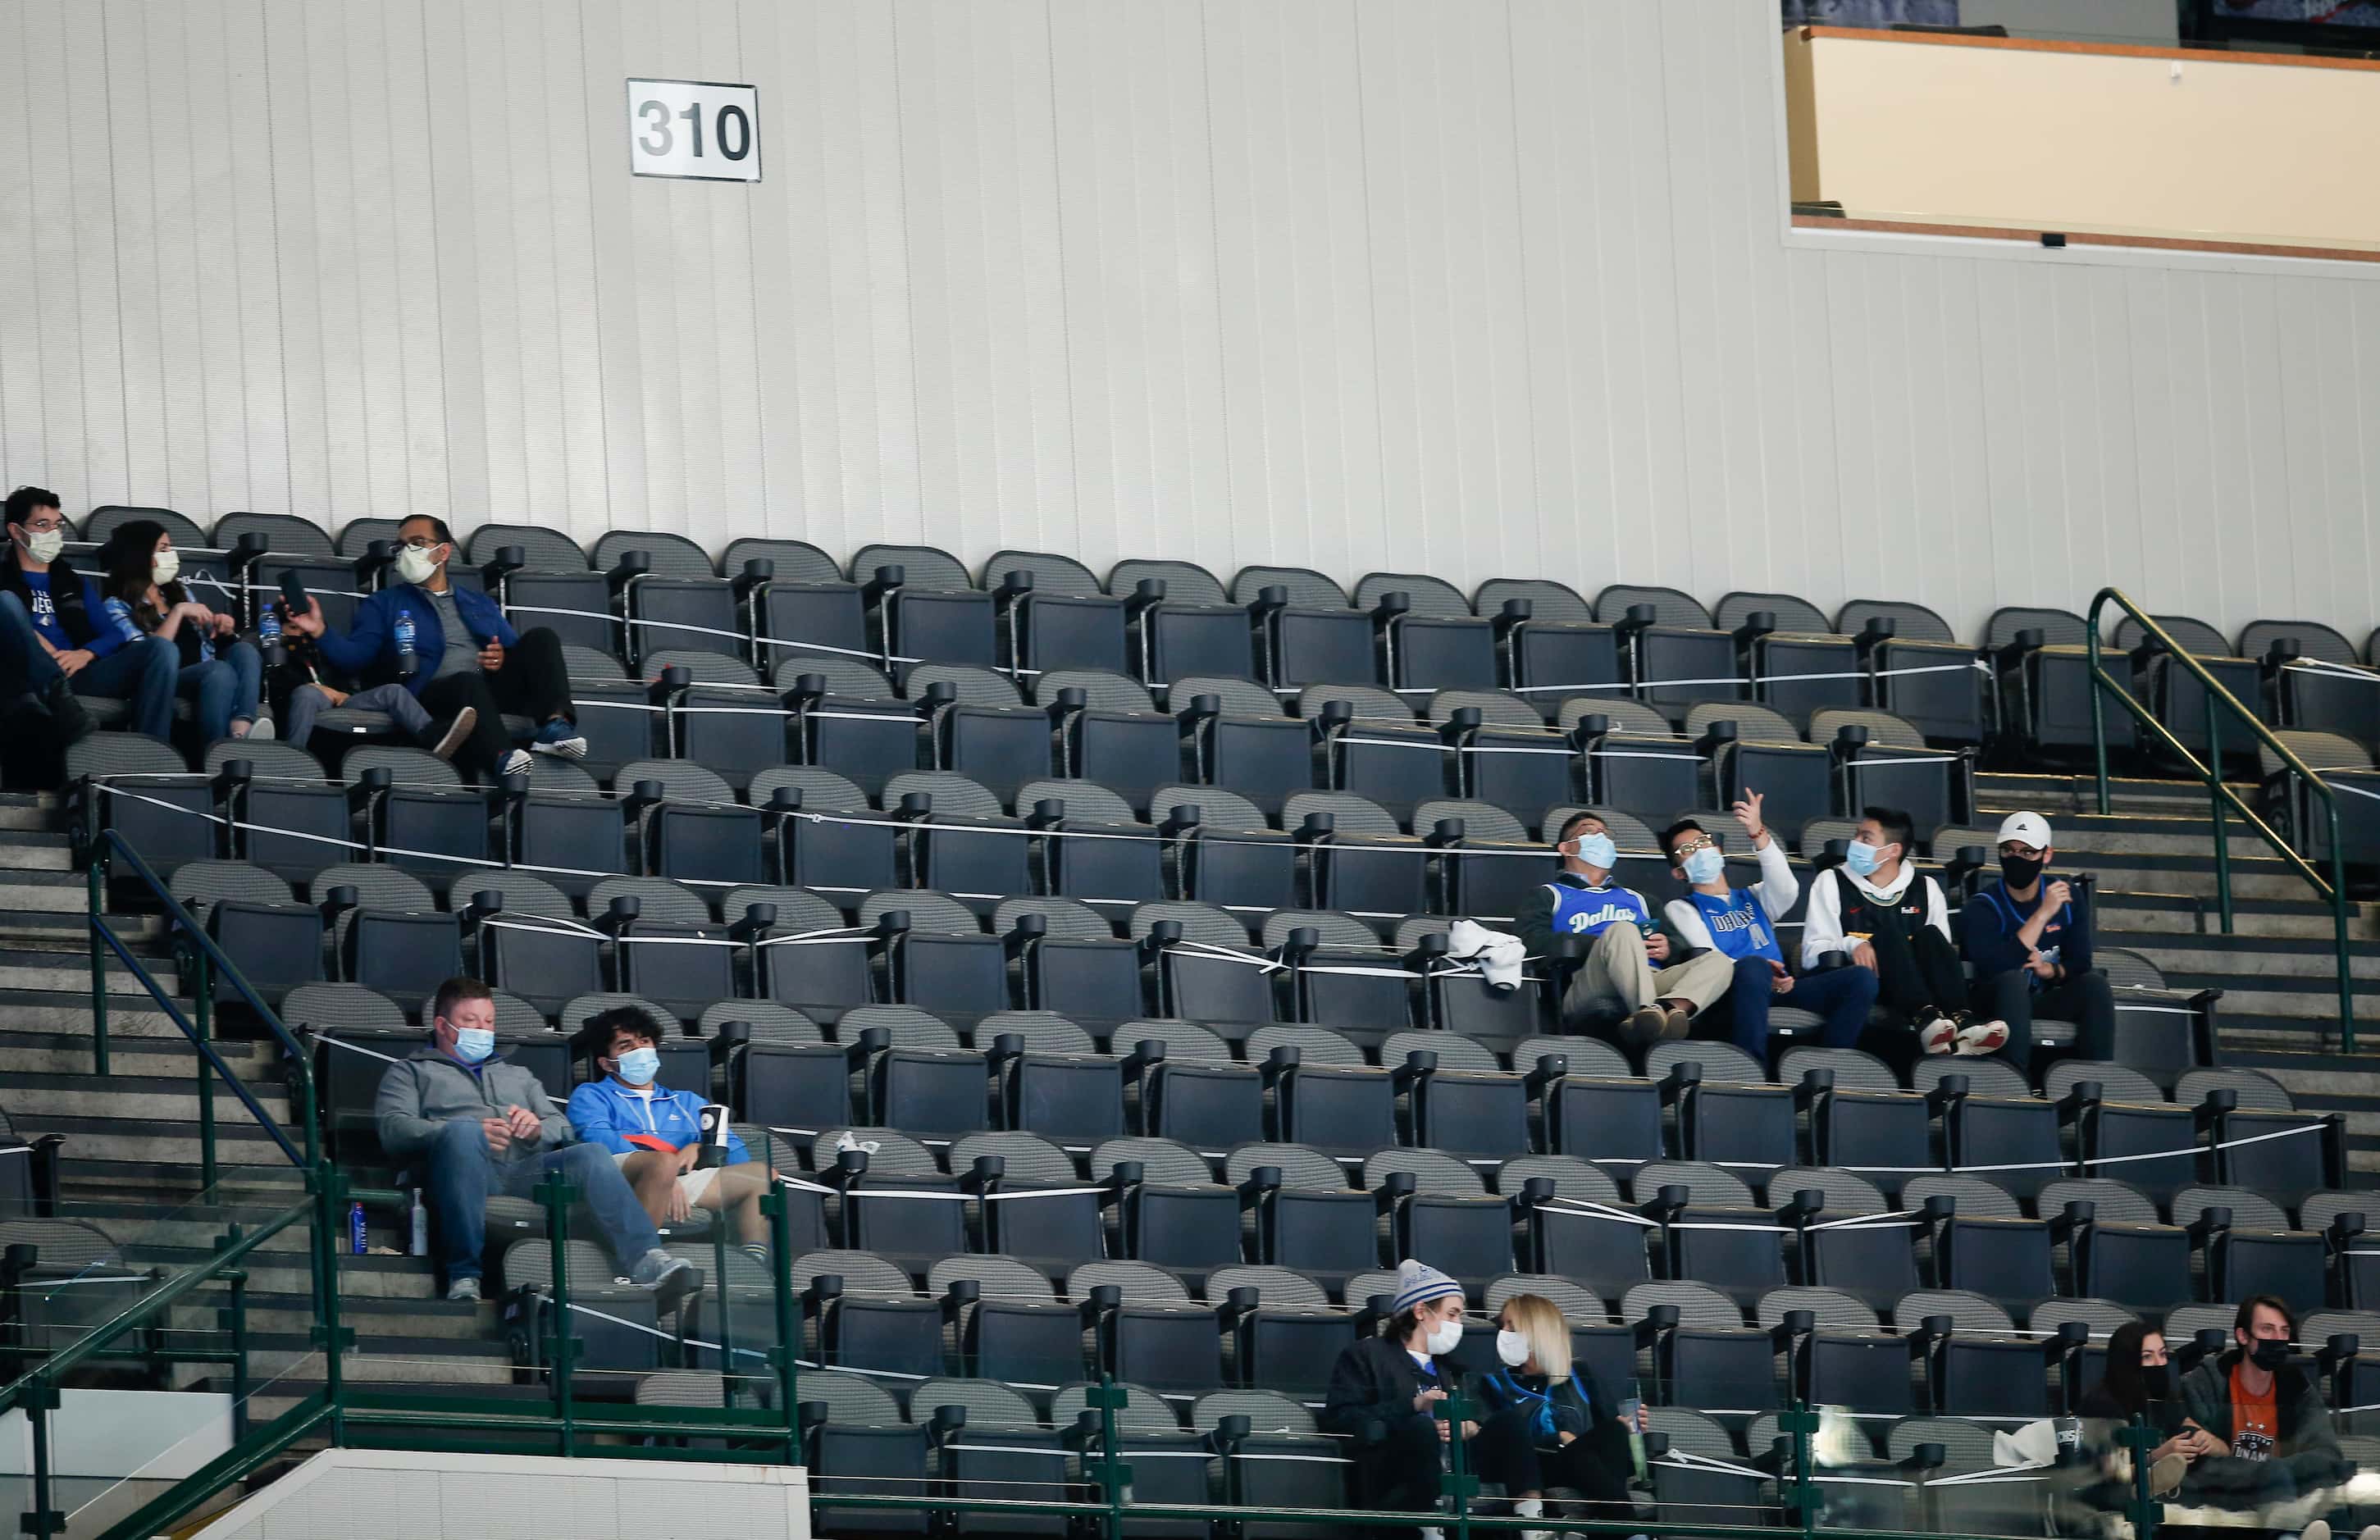 Fans sitting in the 310 section, consisting mostly of health care workers, attend the...